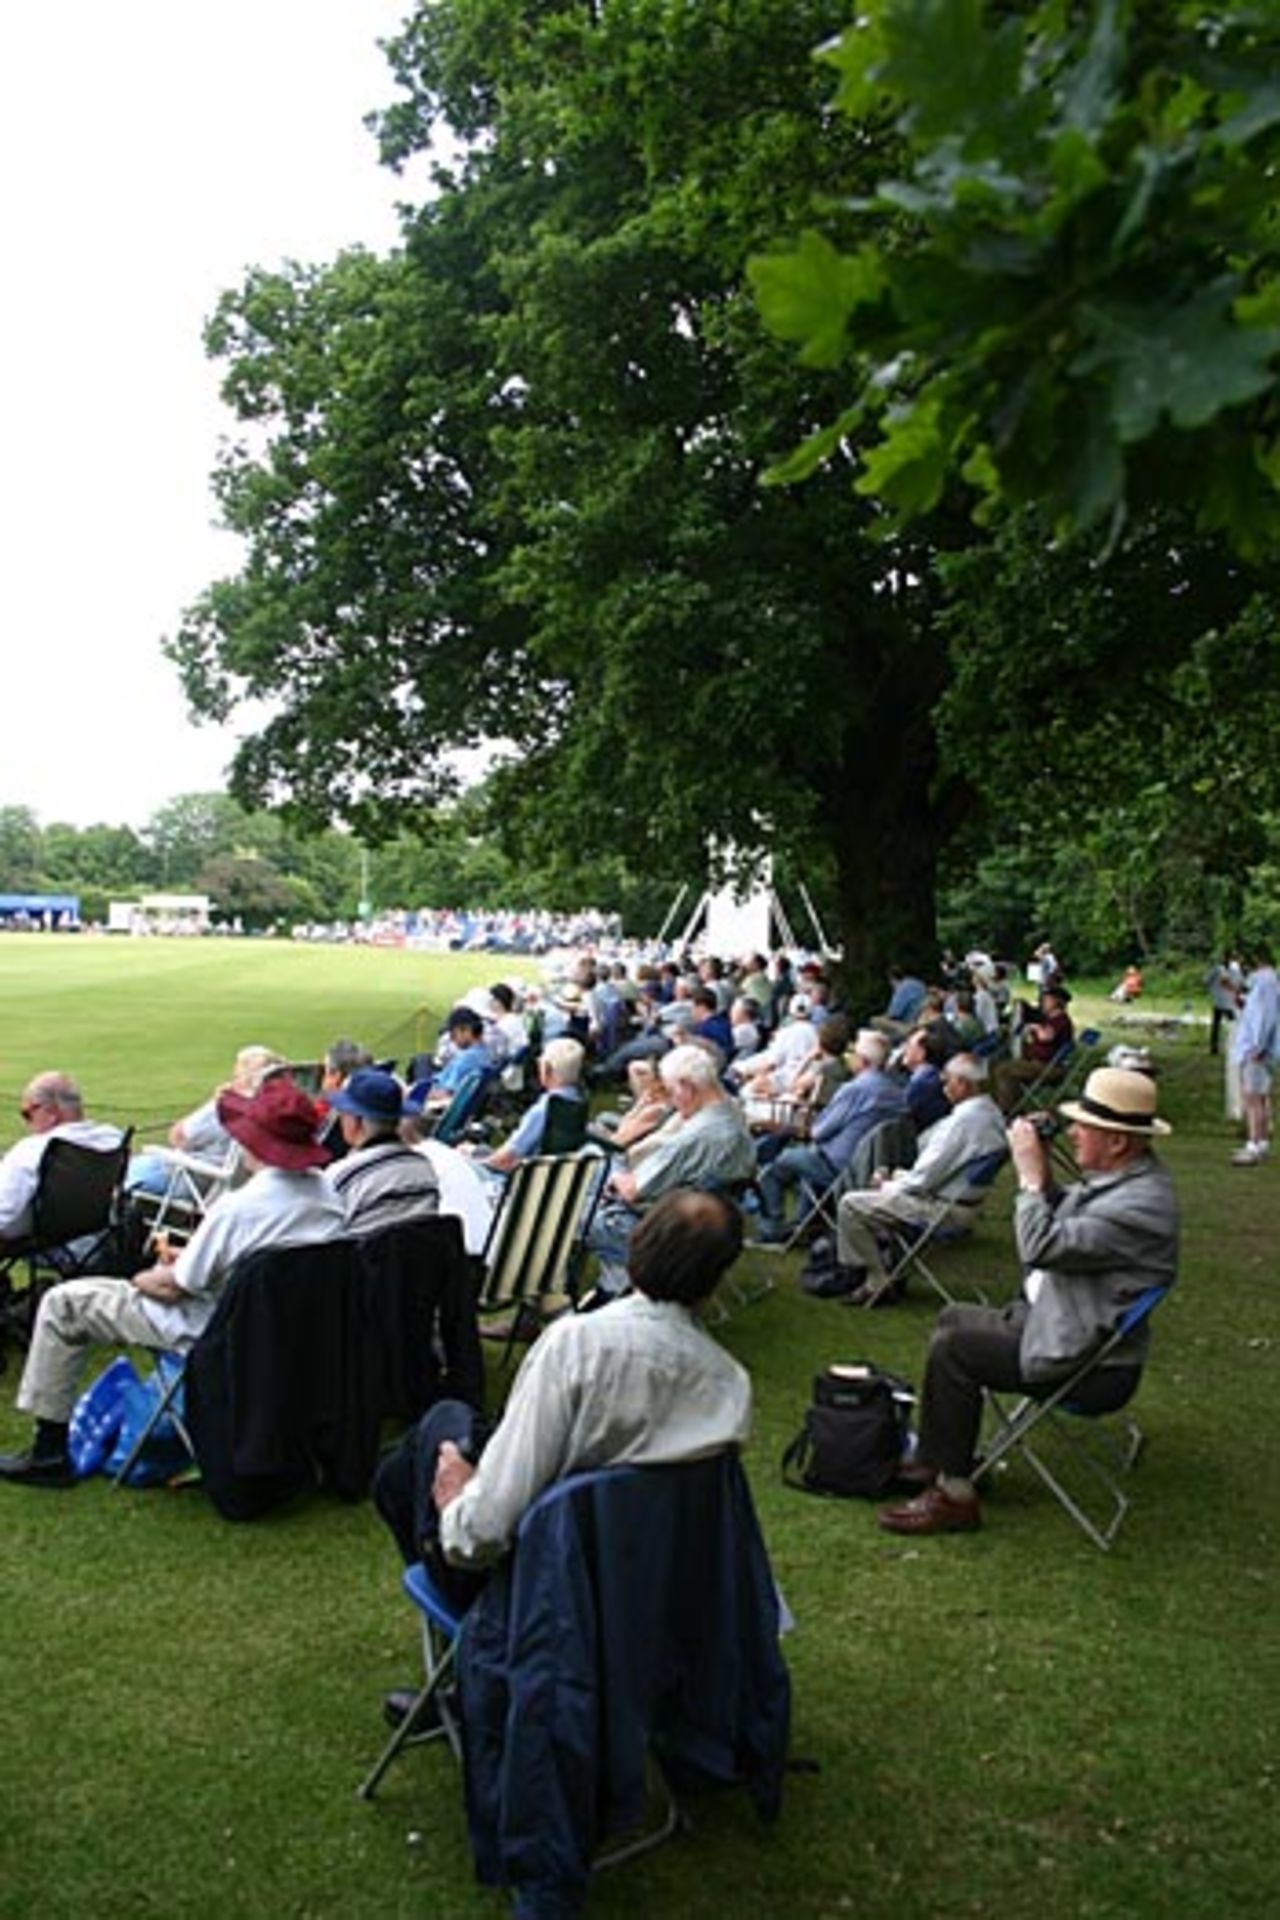 Relaxing in the shade of the oaks at Southgate, Middlesex v Yorkshire, Southgate, June 8, 2006